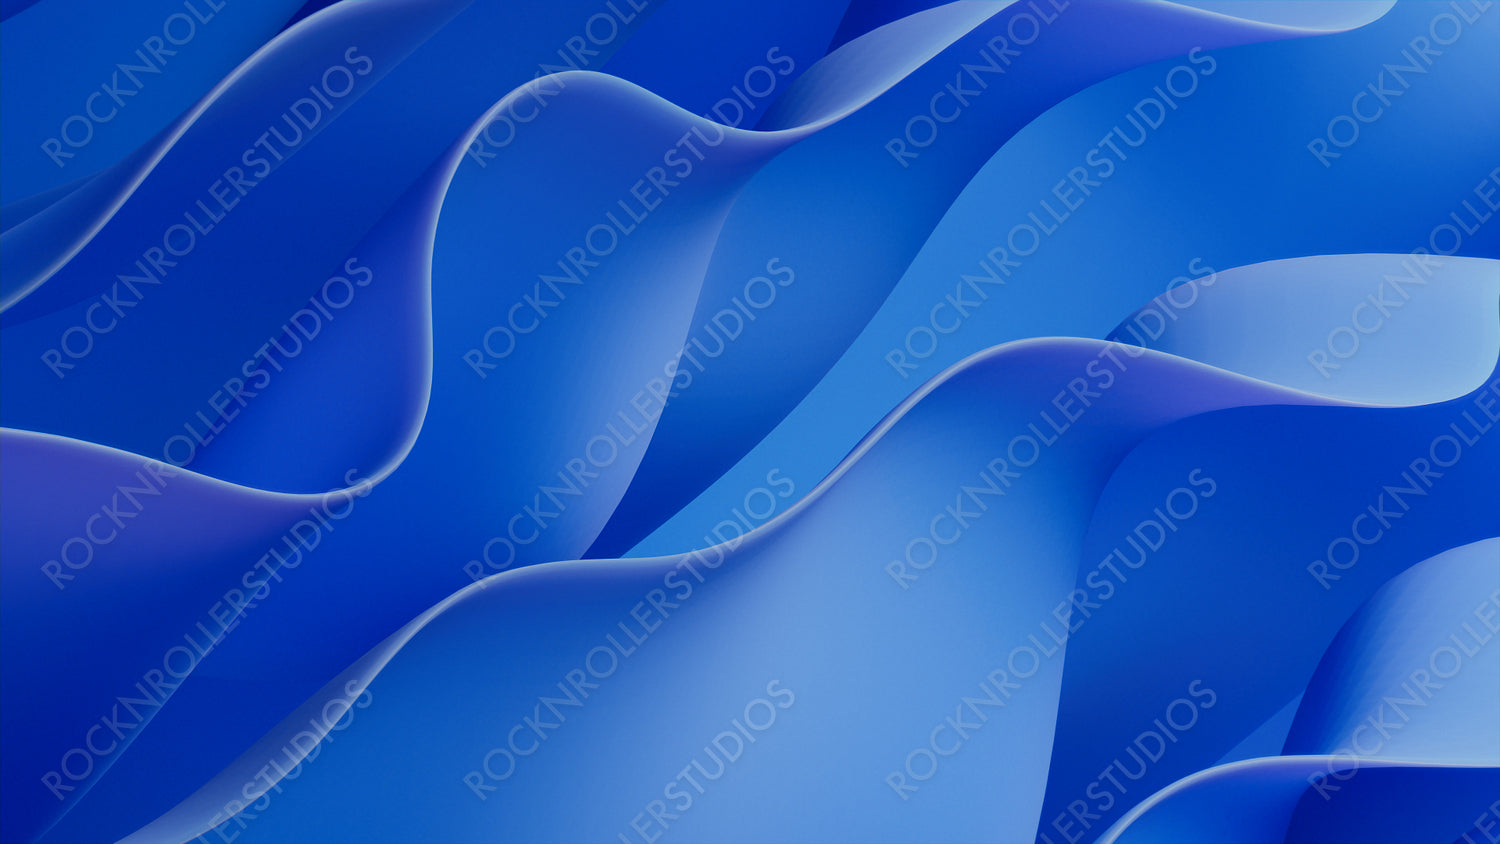 Elegant 3D Design Background, with Undulating, Abstract Blue Surfaces. 3D Render.